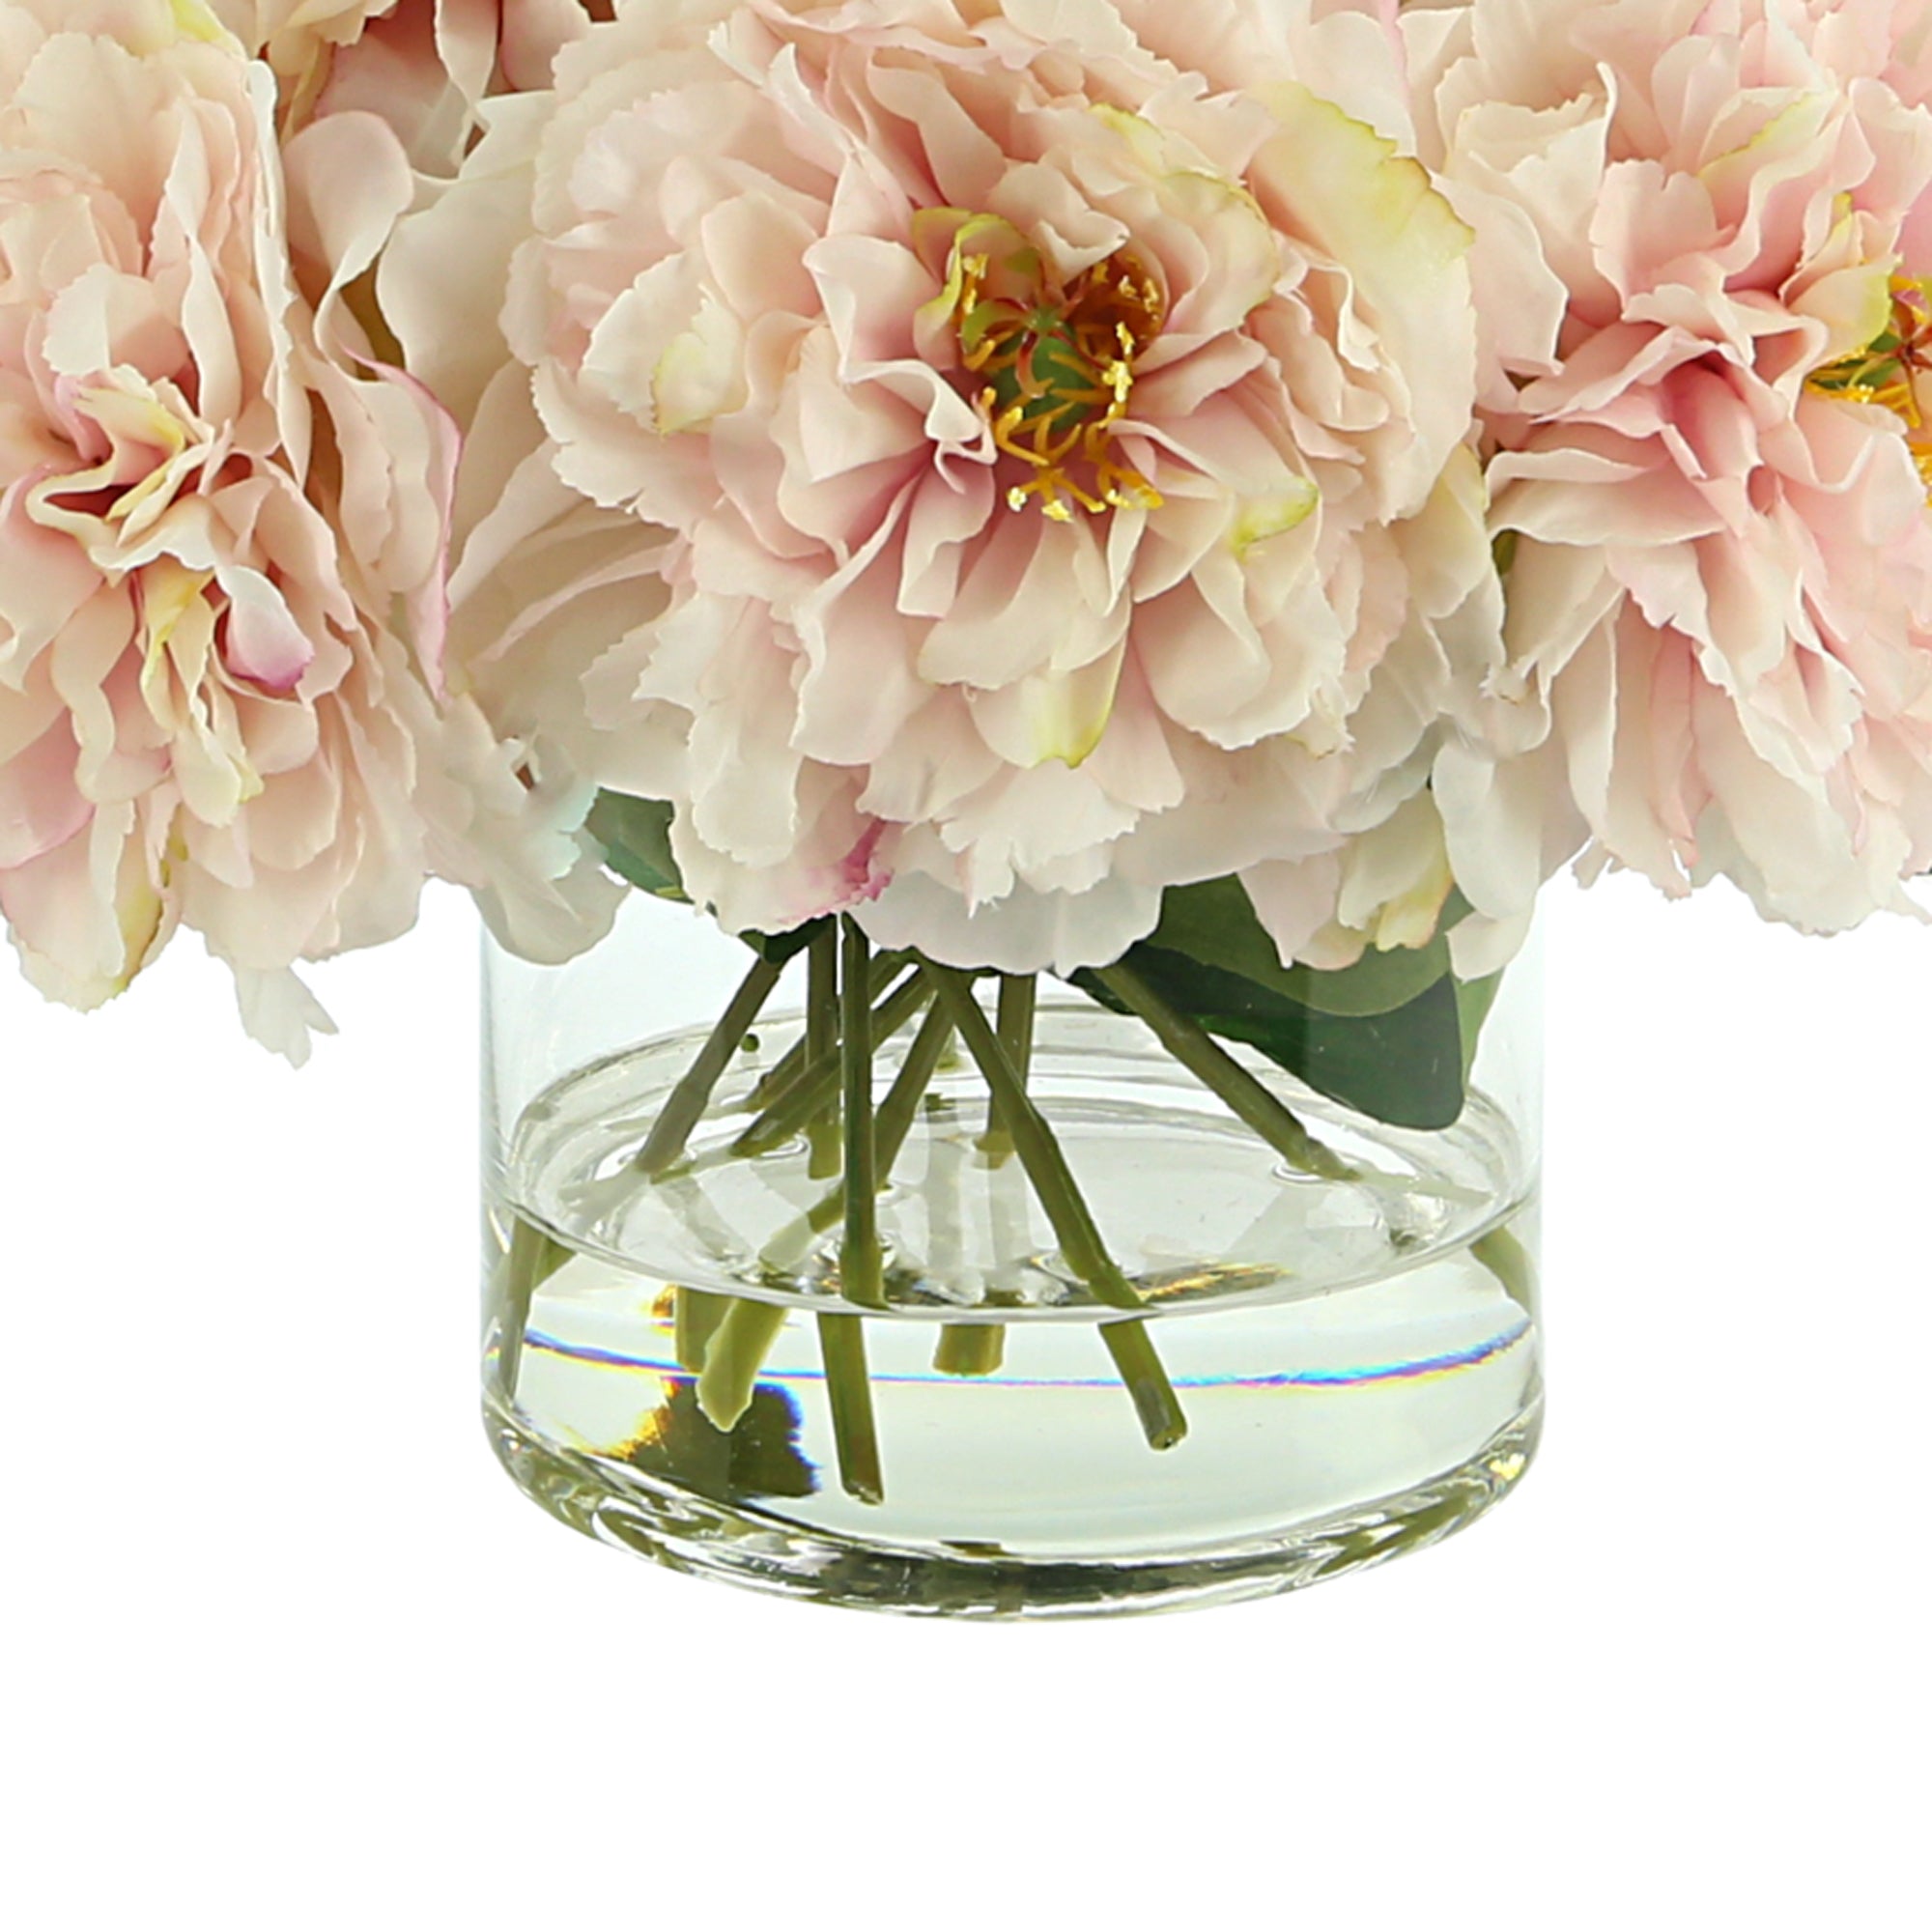 Peonies in clear glass vase